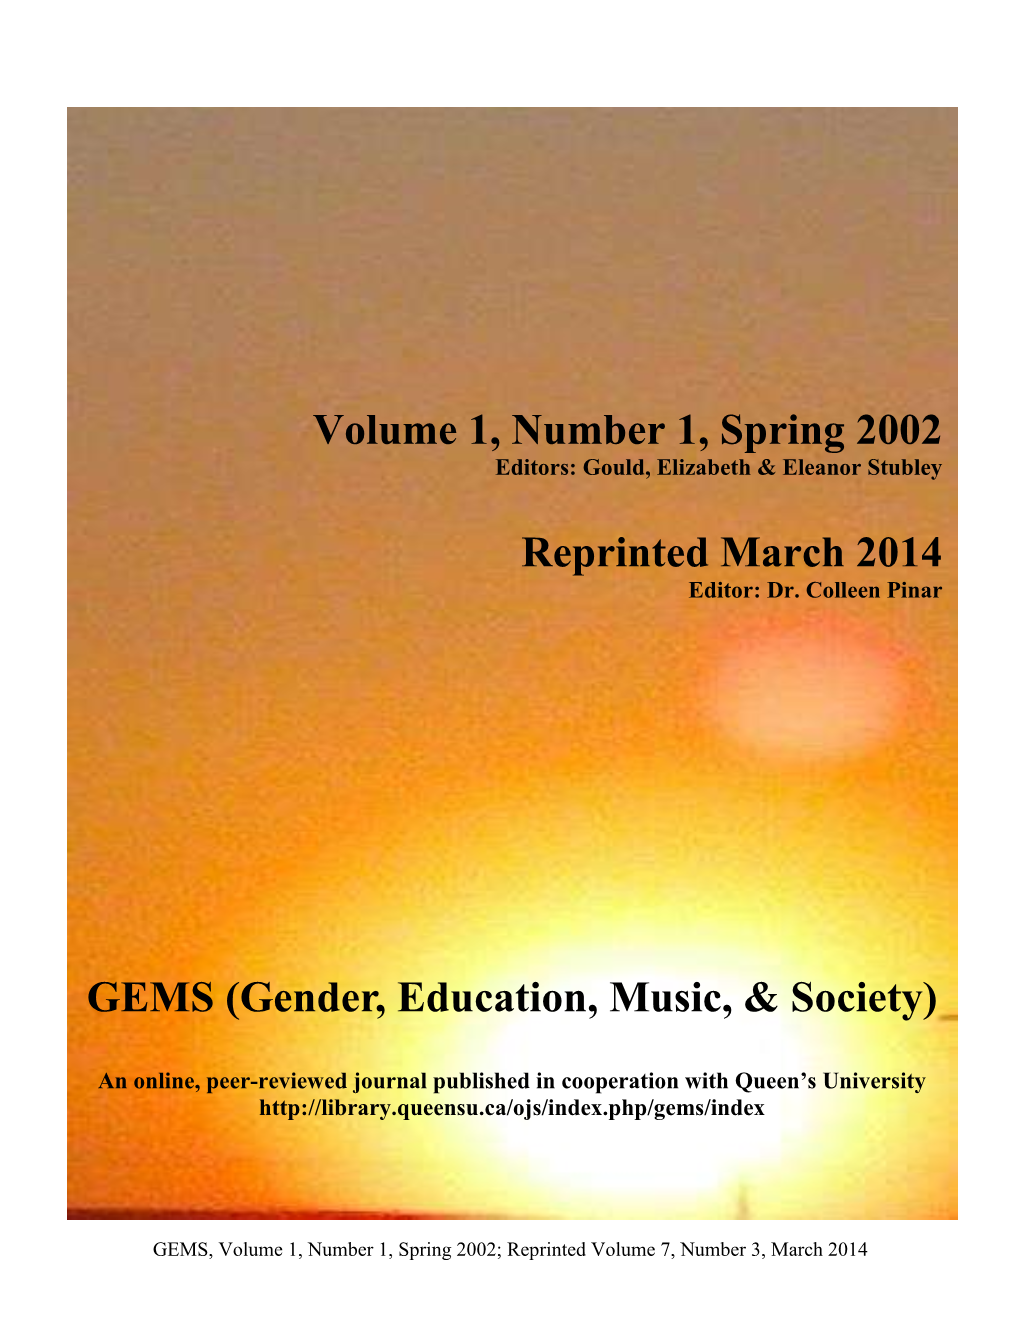 Volume 1, Number 1, Spring 2002 Reprinted March 2014 GEMS (Gender, Education, Music, & Society)